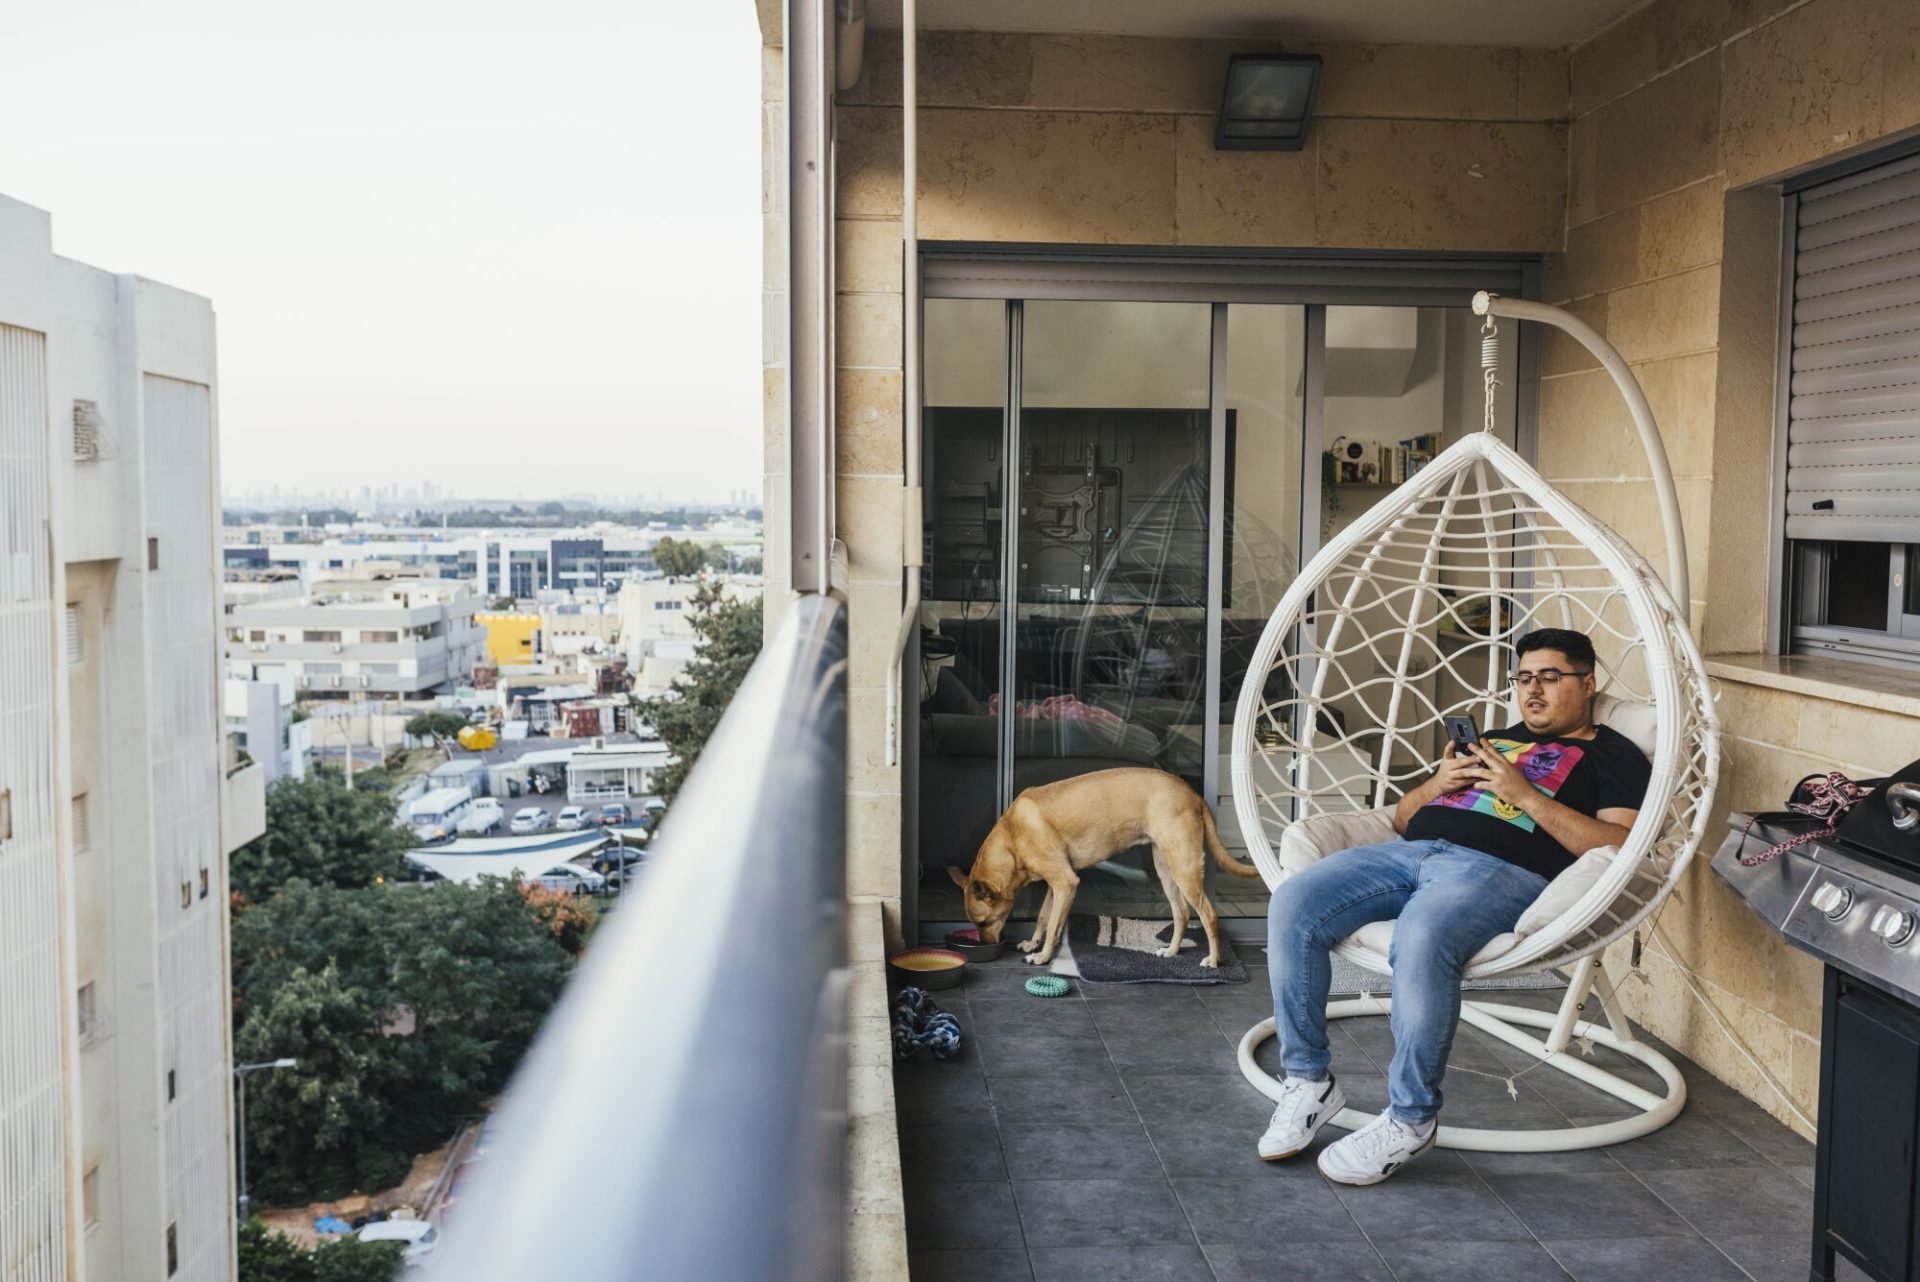  A man in dark T-shirt and jeans looks at his phone while seated in a white hammock chair on a balcony near a dog